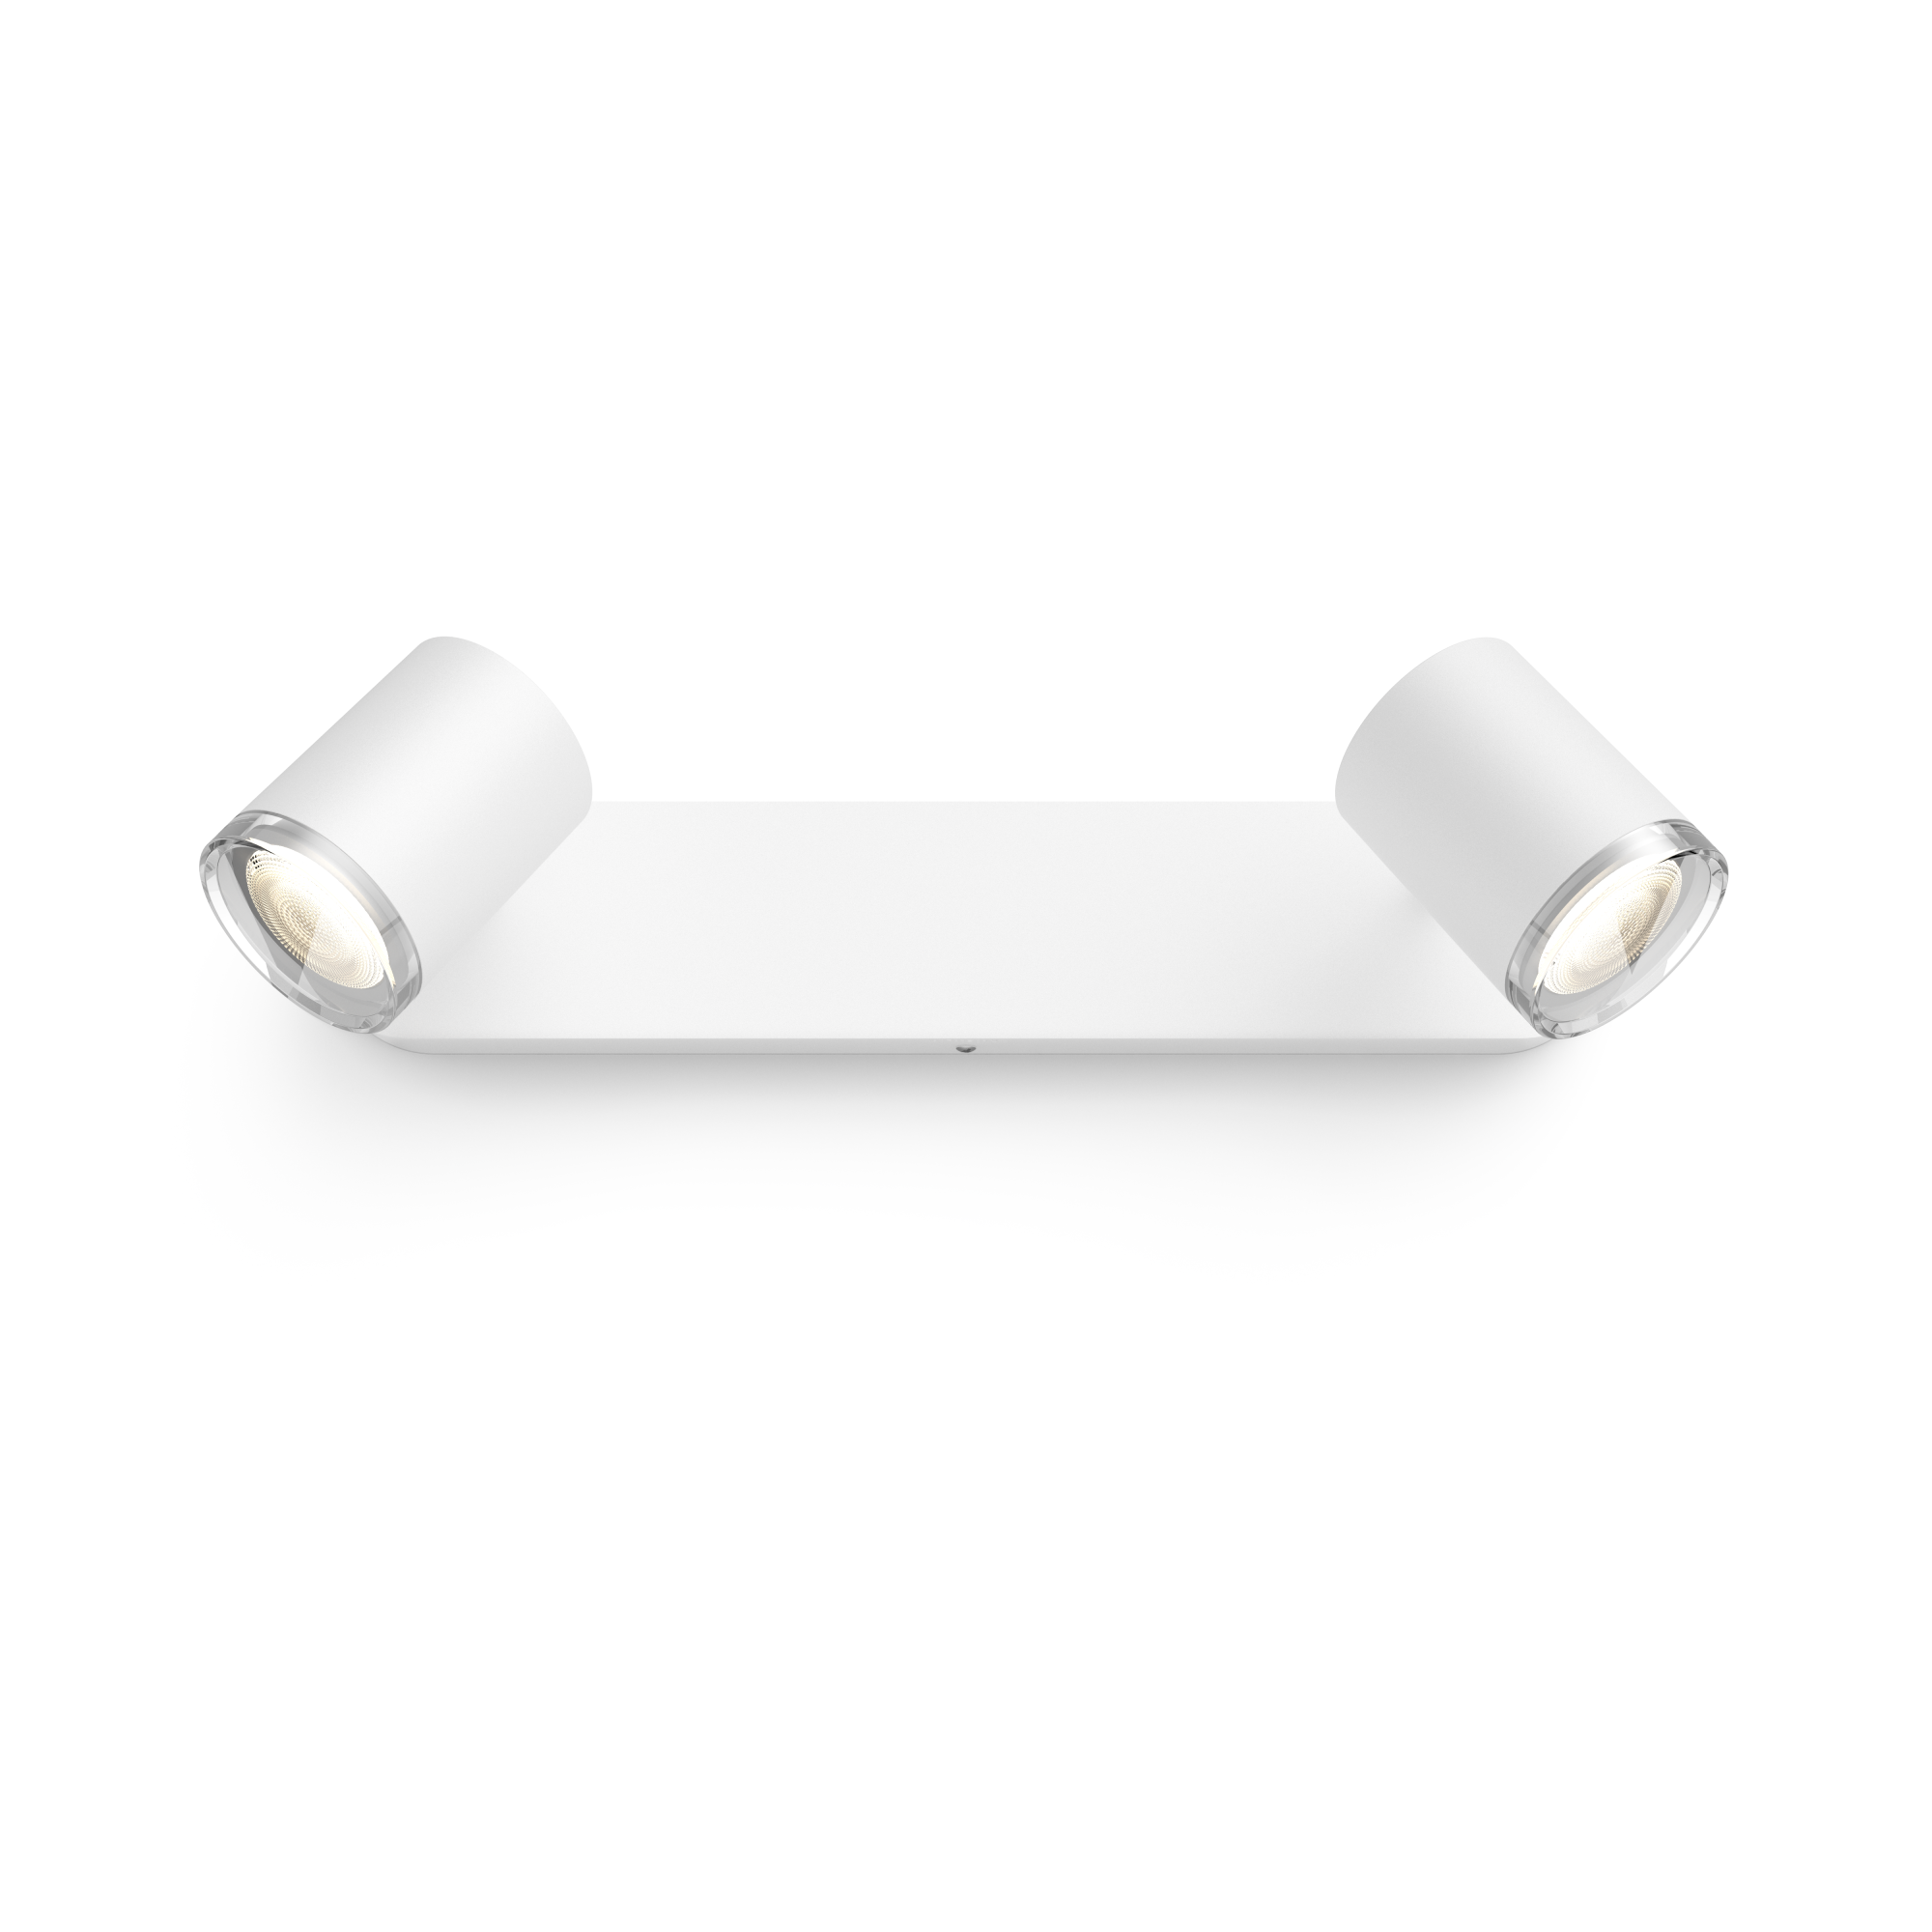 Philips Hue Adore LED Spot Double-Flamed 2x 350lm white incl. Dimmer Switch